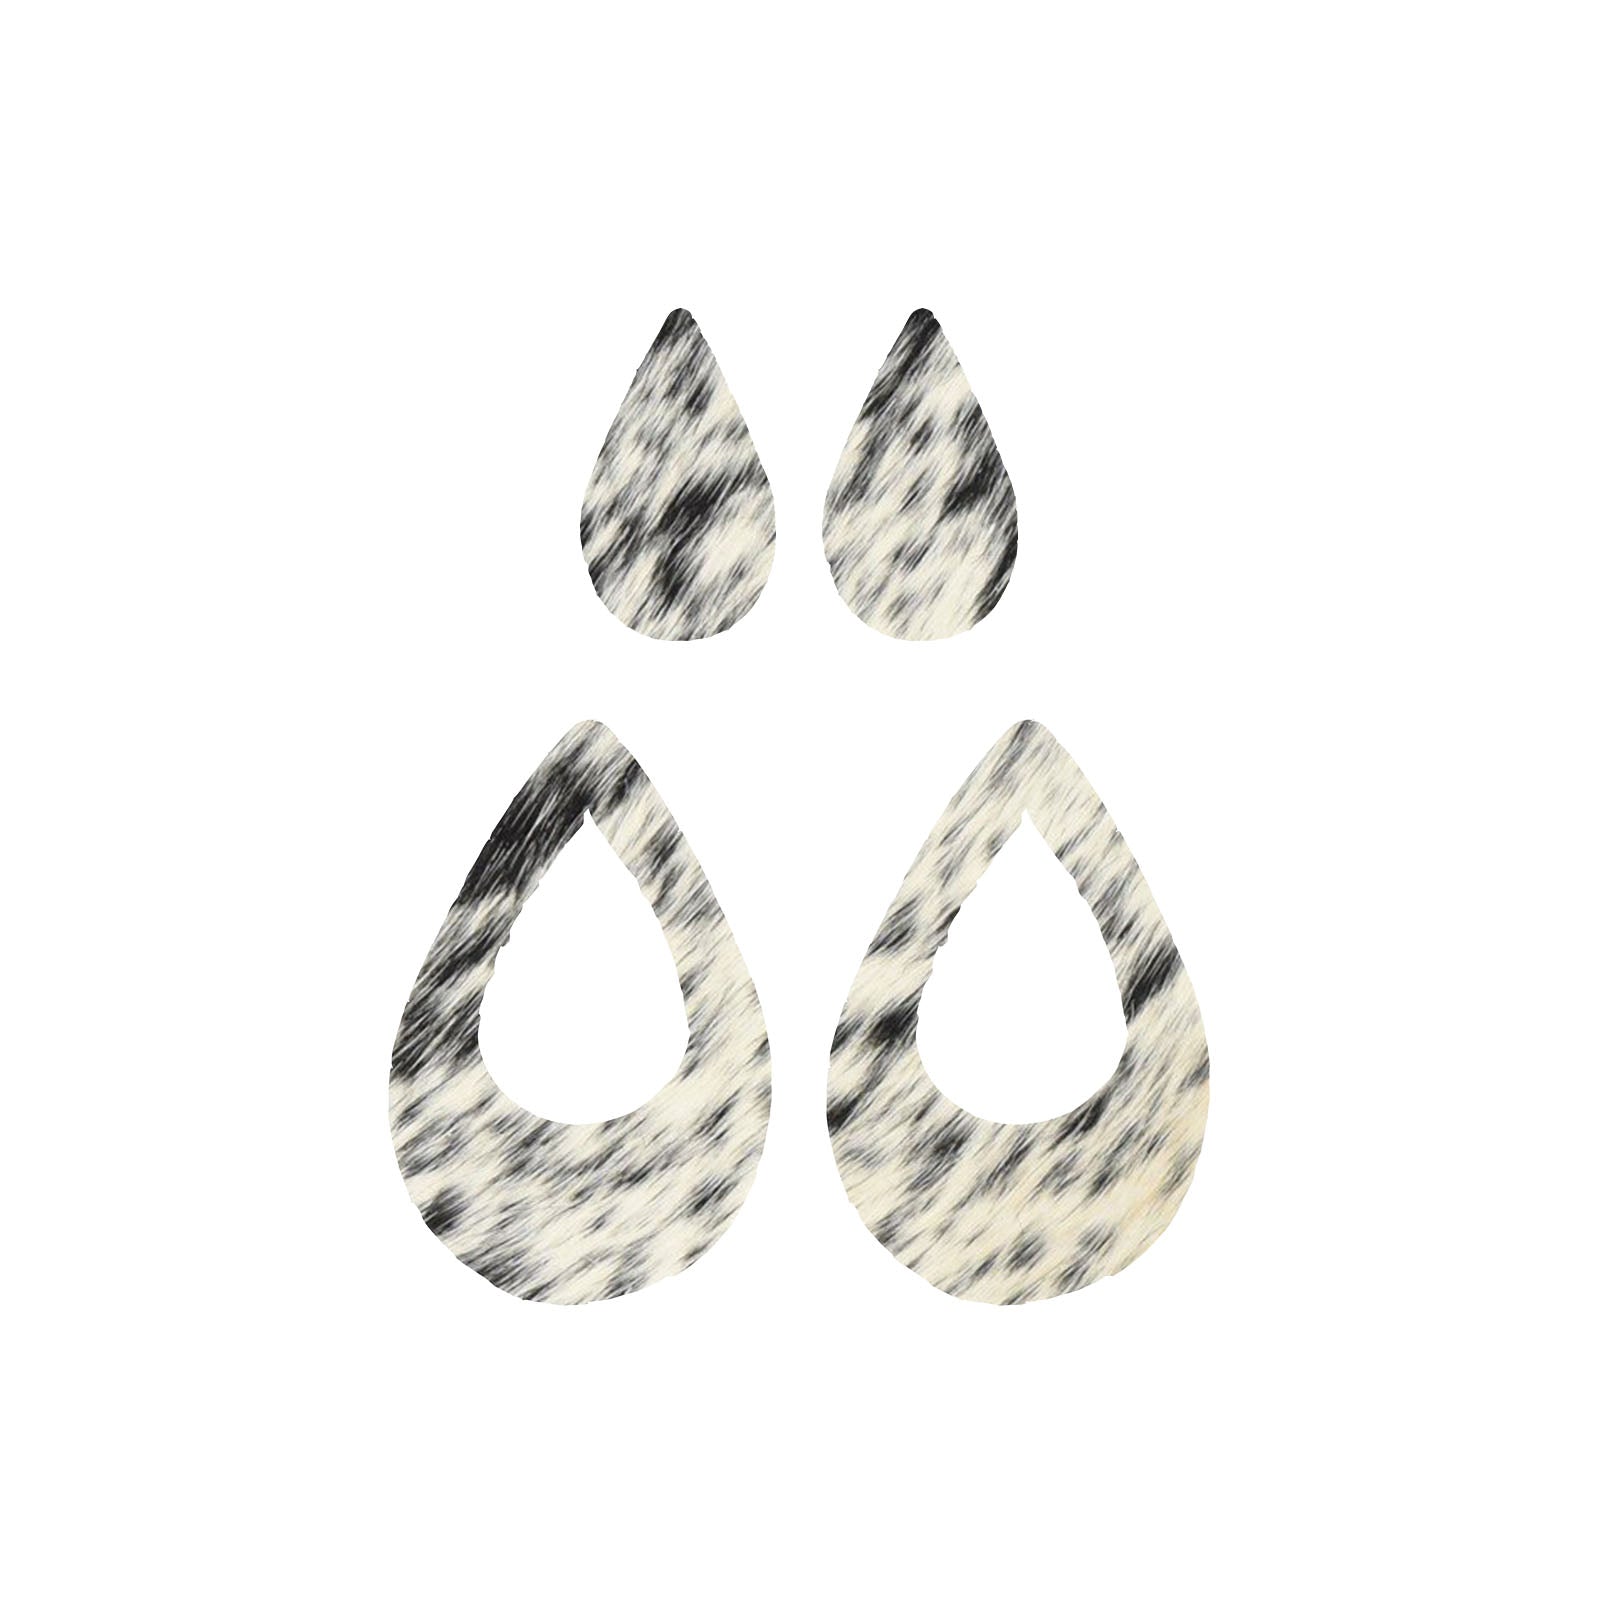 Spotted Light Black and Off White Hair On Die Cut Earrings, Medium Teardrop Window | The Leather Guy